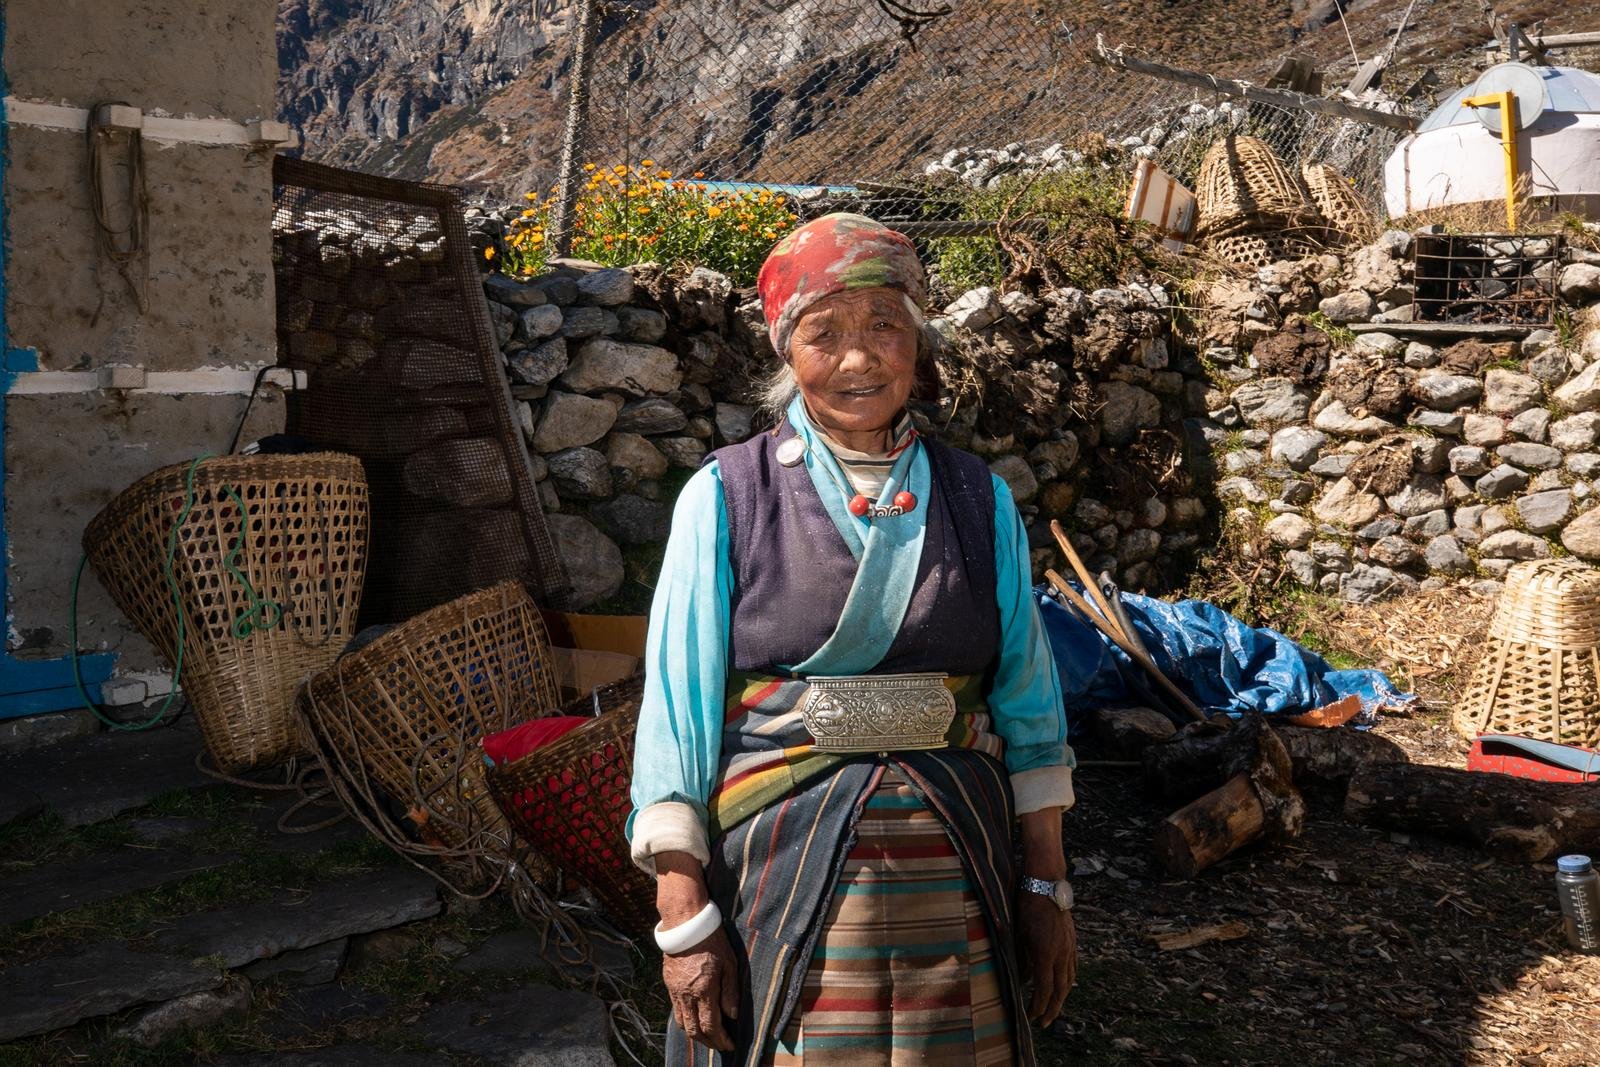  Furdiki Sherpa, 80, can see the edge of the lake from her home in the village of&nbsp;Na.  She has lived here all her&nbsp;life. “I only want to live here,” she says. “Why would I want to live anywhere else? We have clean air, clean&nbsp;water.” 